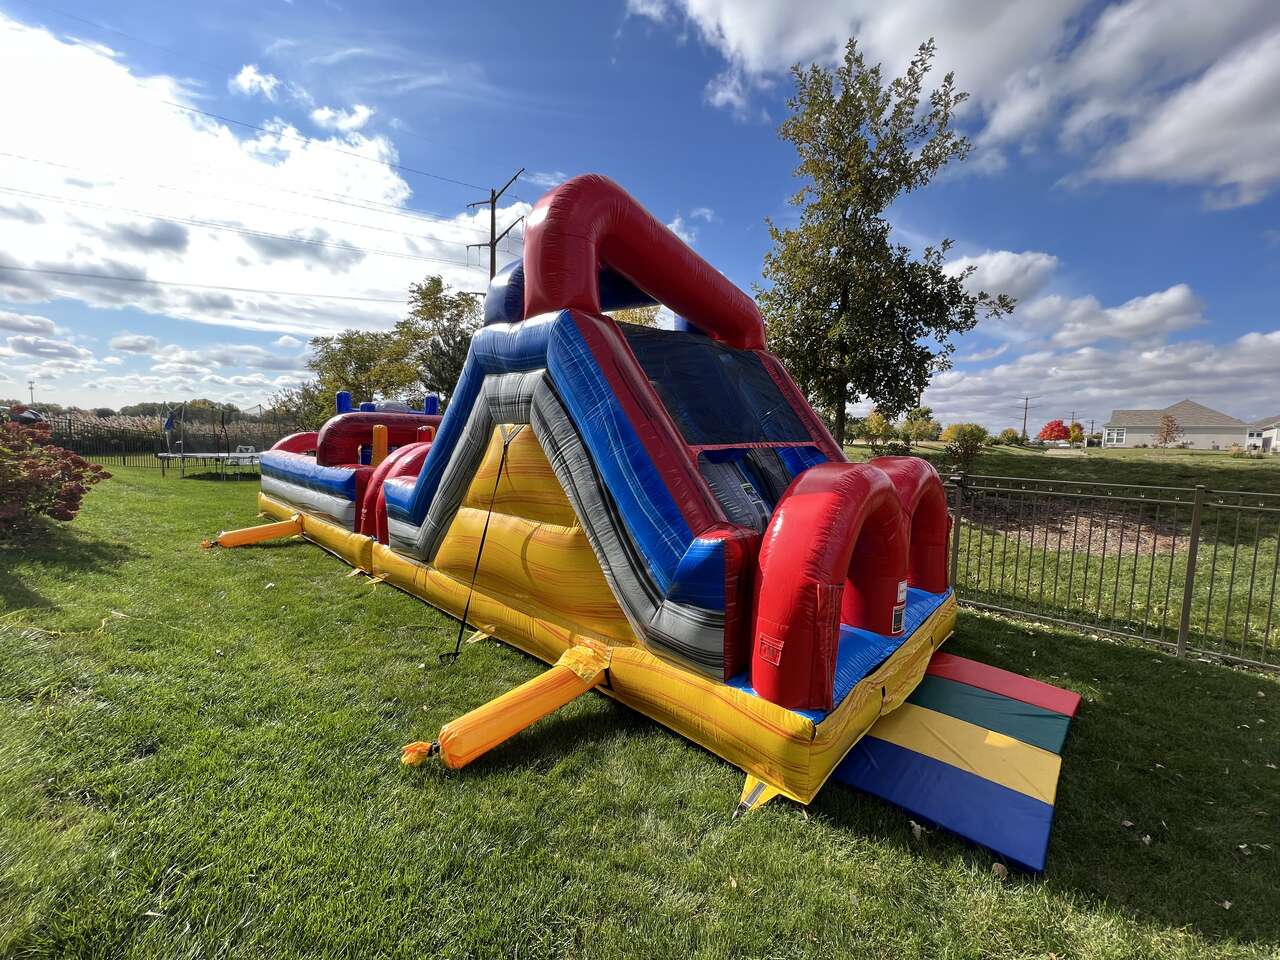 rent an obstacle course by Fun Bounces Rental in Dwight Il 60420